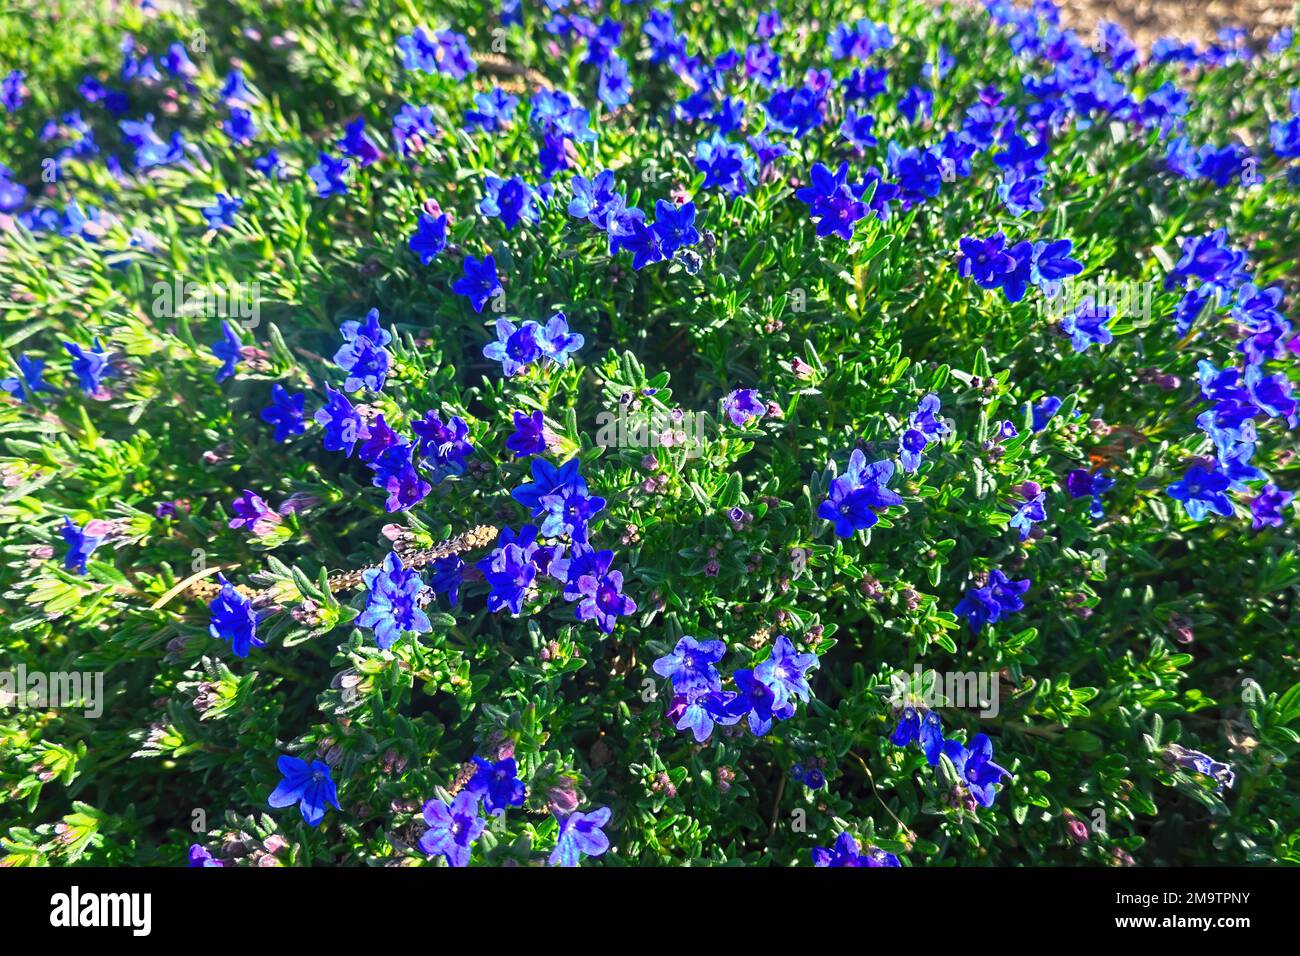 Lithodora (Lithodora diffusa) - multi-branched ground cover with funnel-shaped blue flowers. Stock Photo